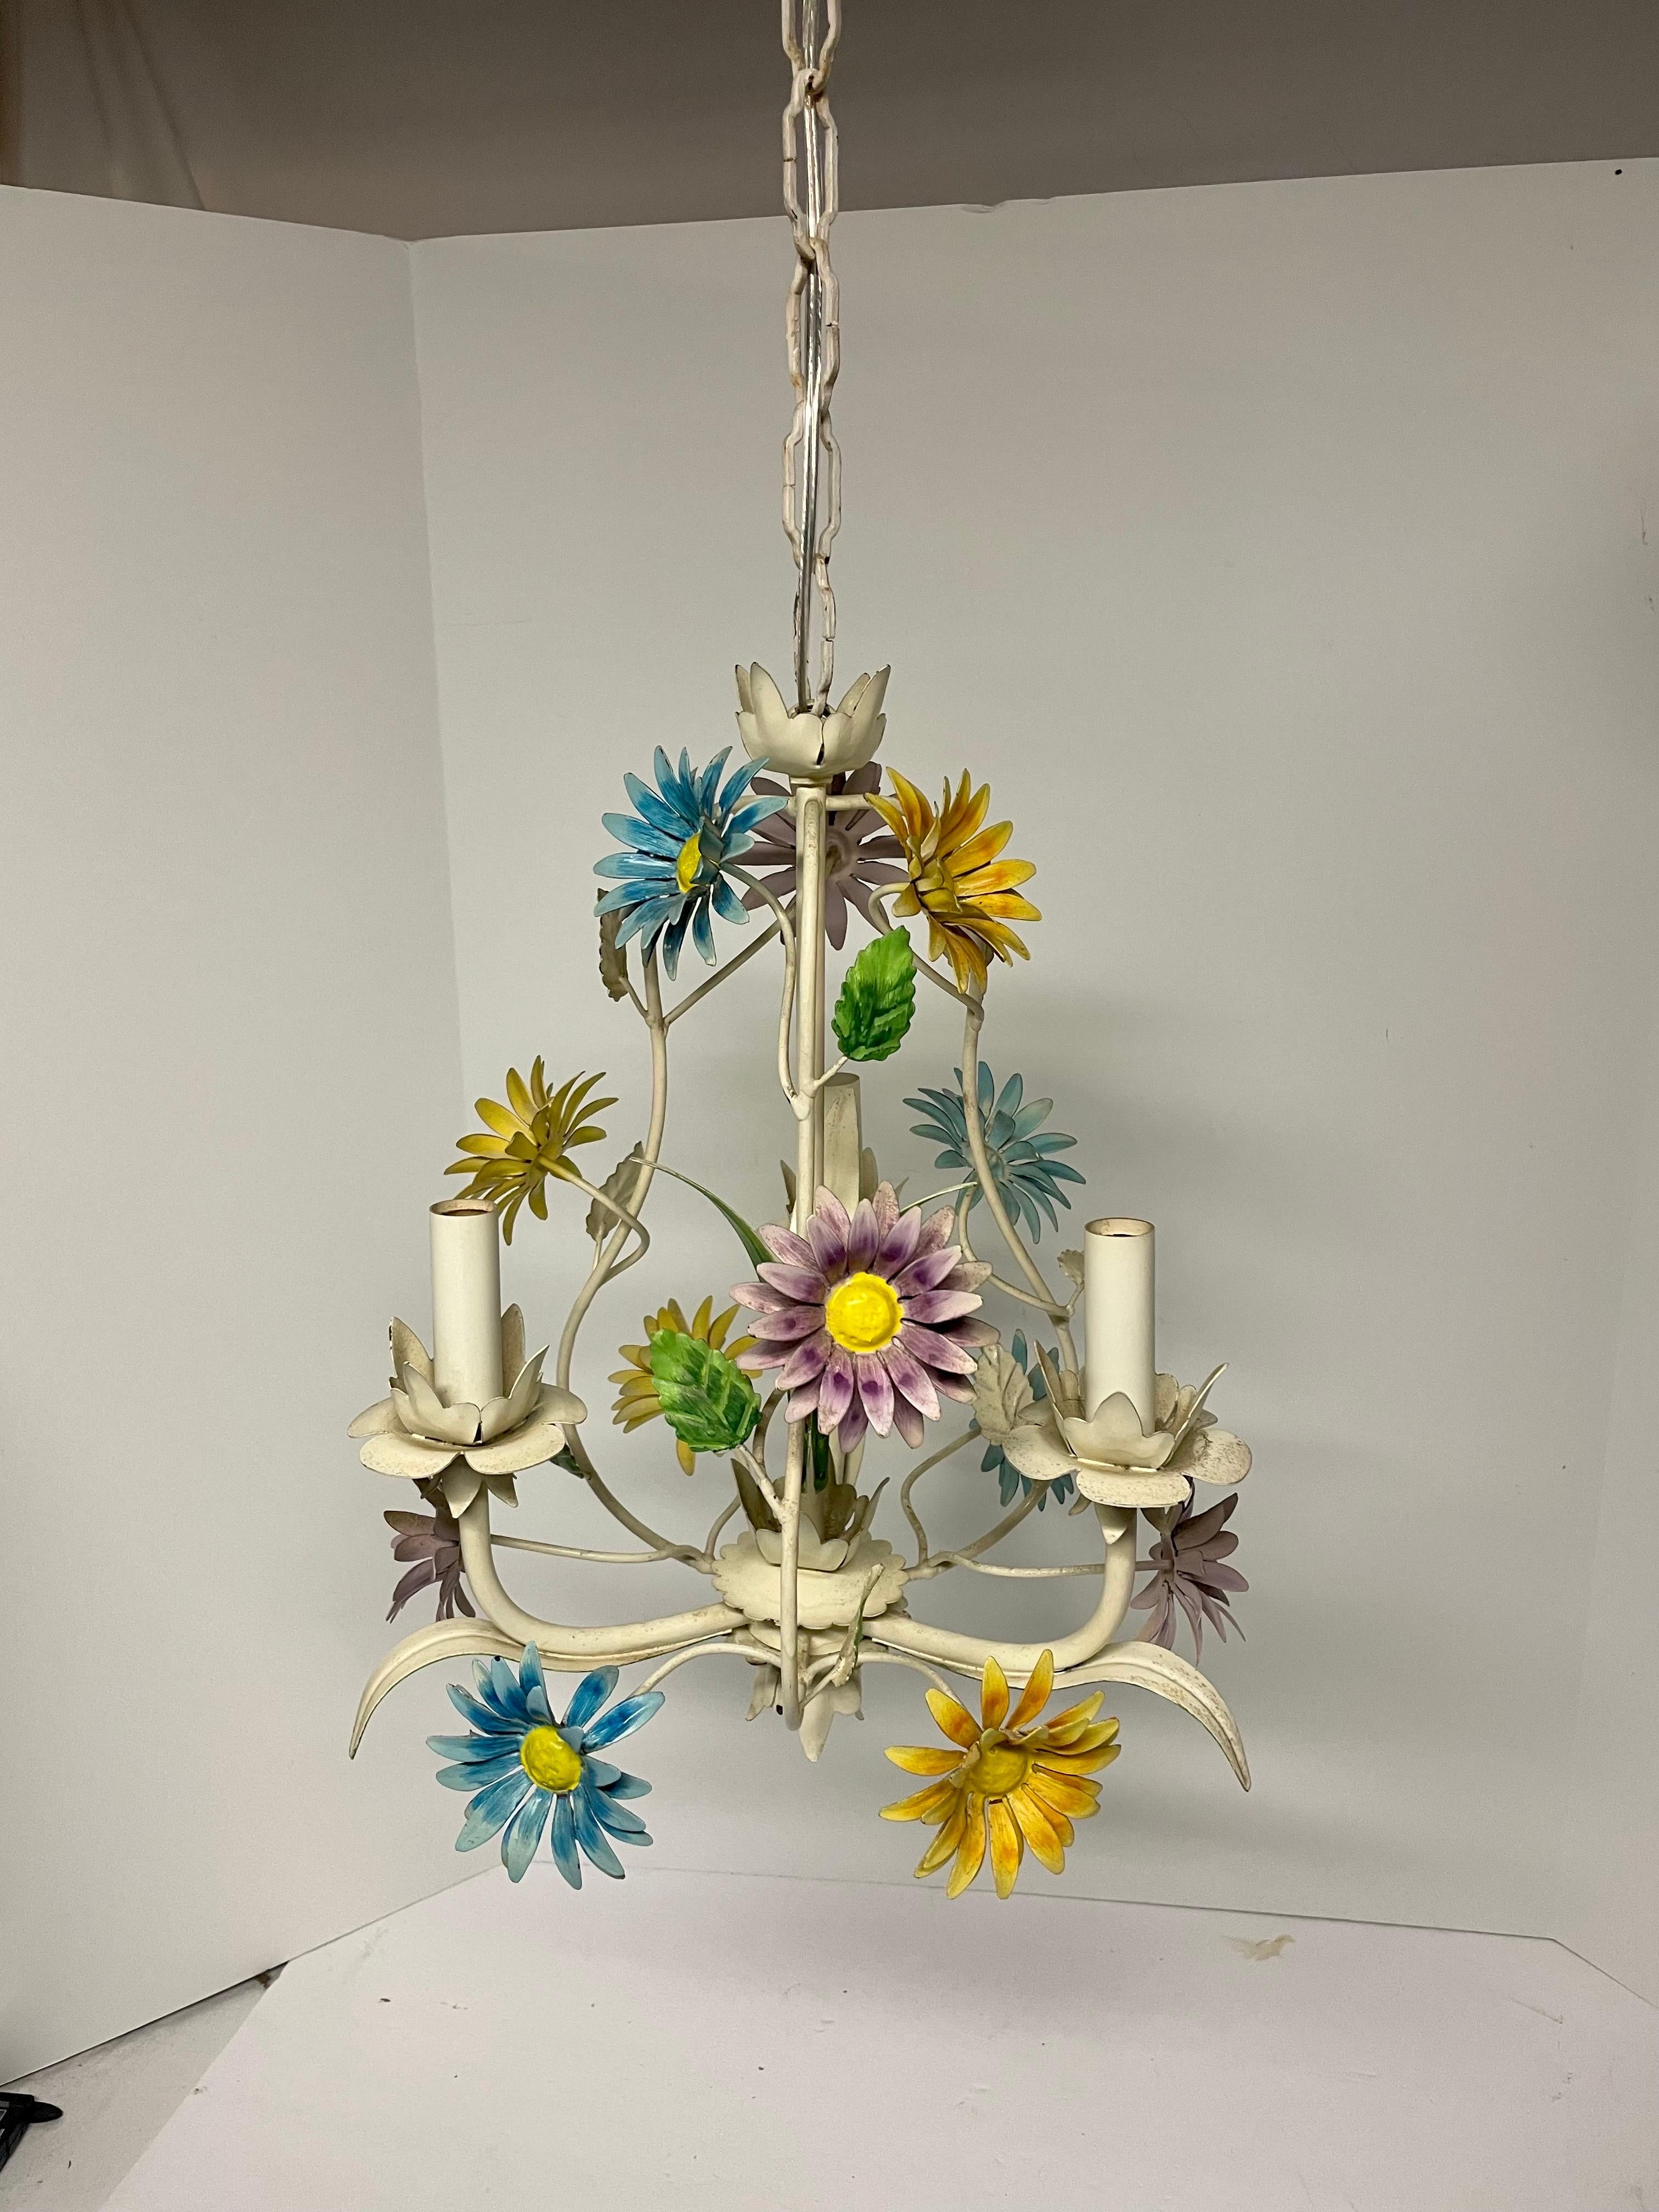 Hand-Painted Colorful Italian Tole Floral Daisy Chandelier